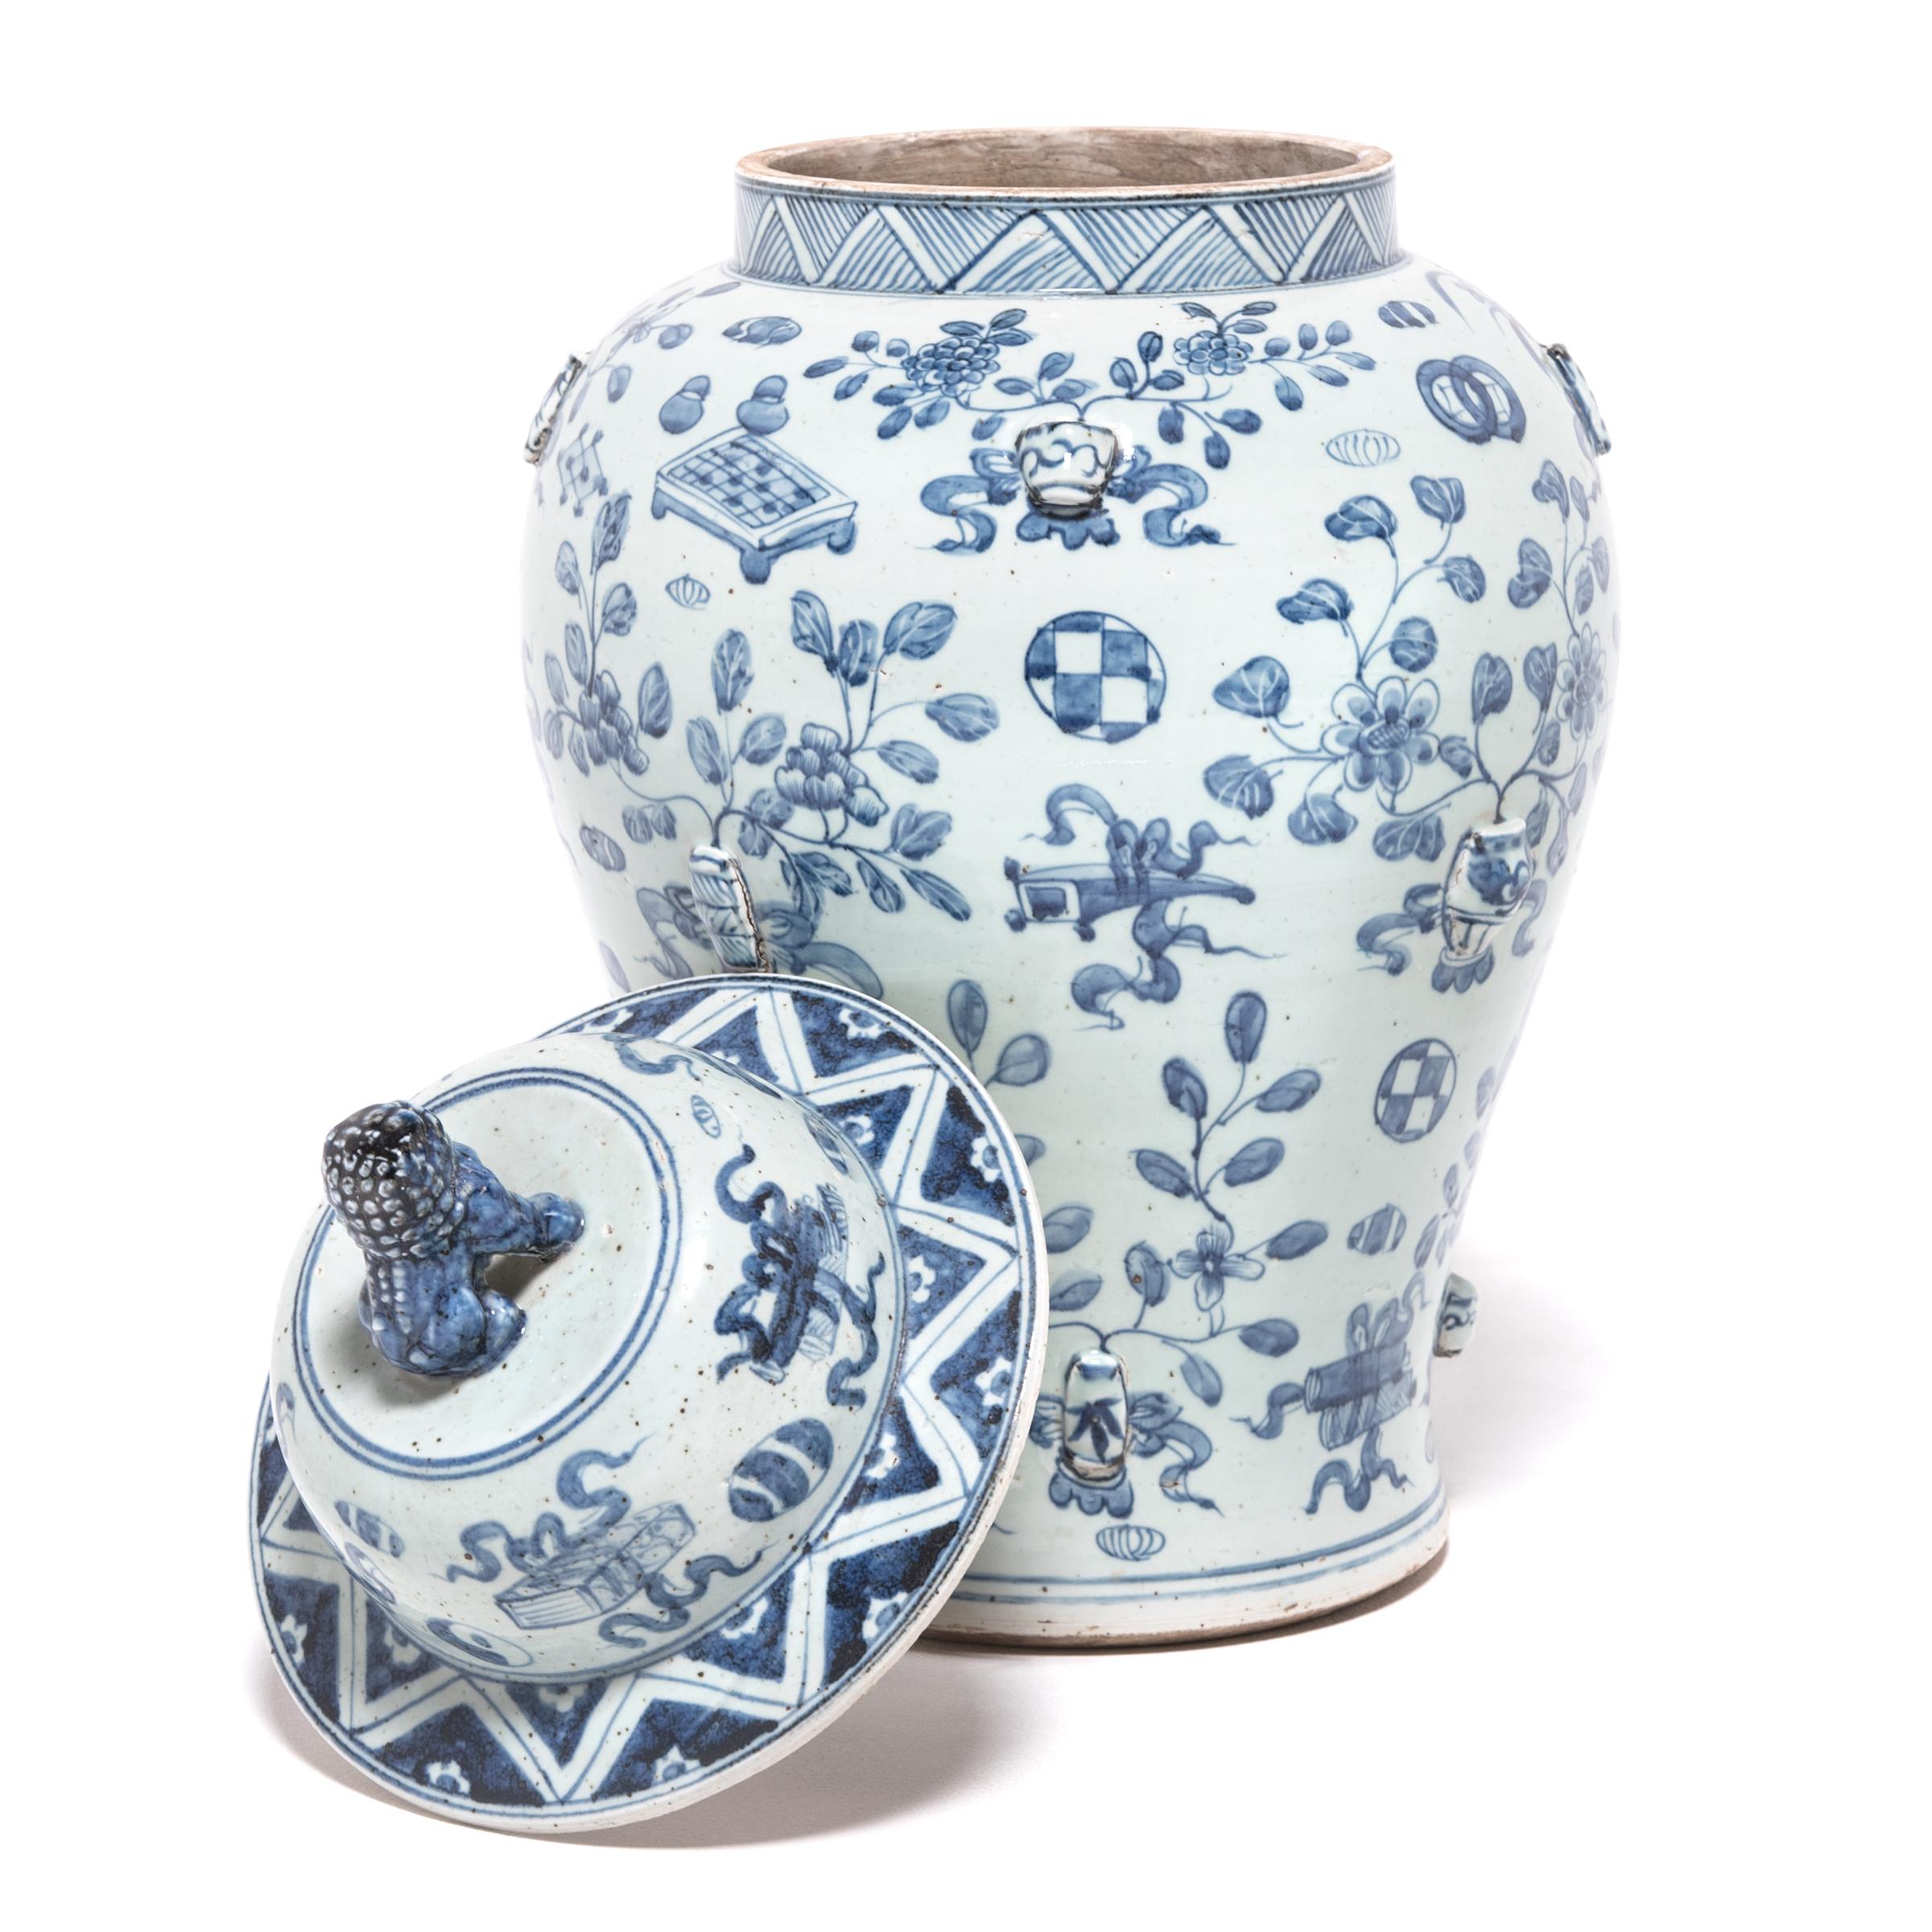 Contemporary Chinese Blue and White Scholars' Joy Ginger Jar